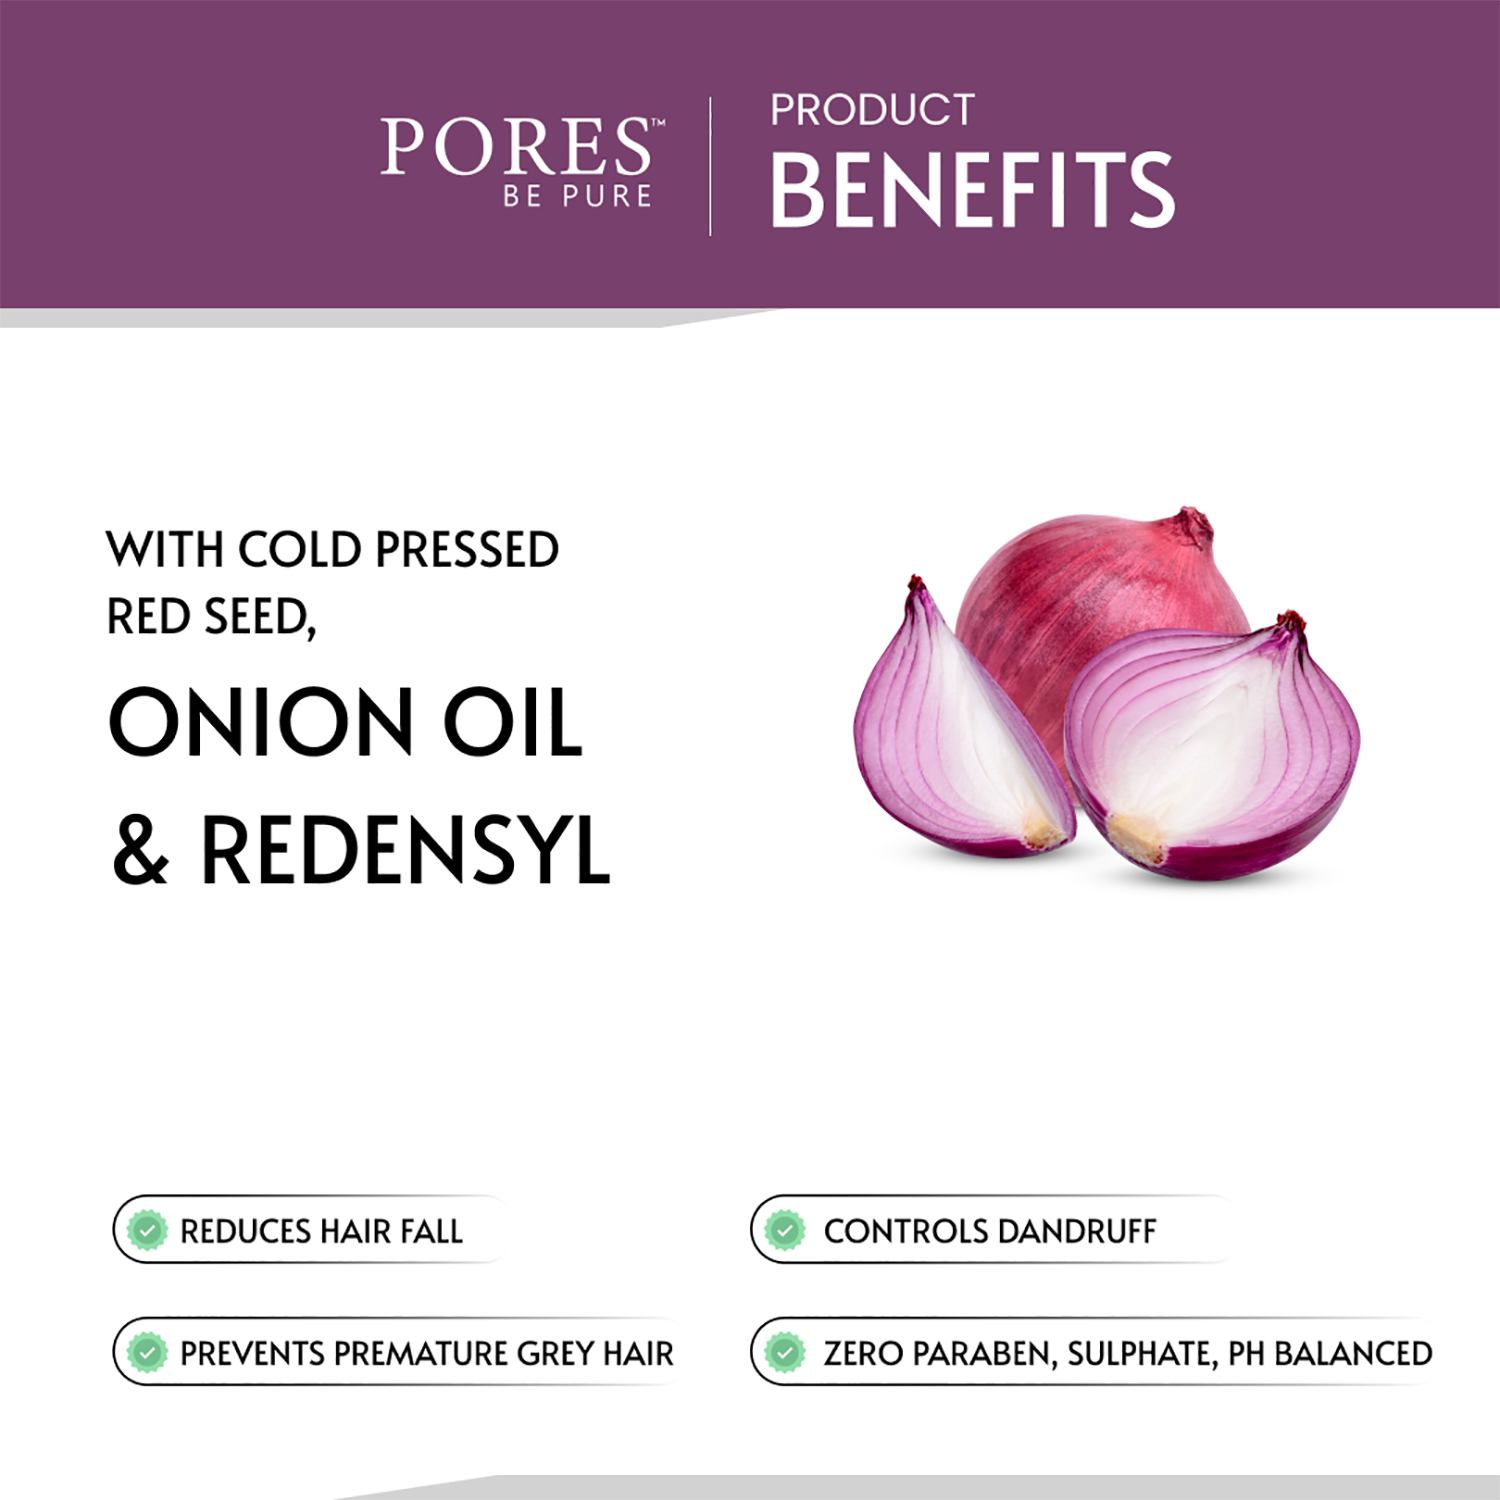 PORES BE PURE benefits with cold pressed red seed, onion oil & redensyl